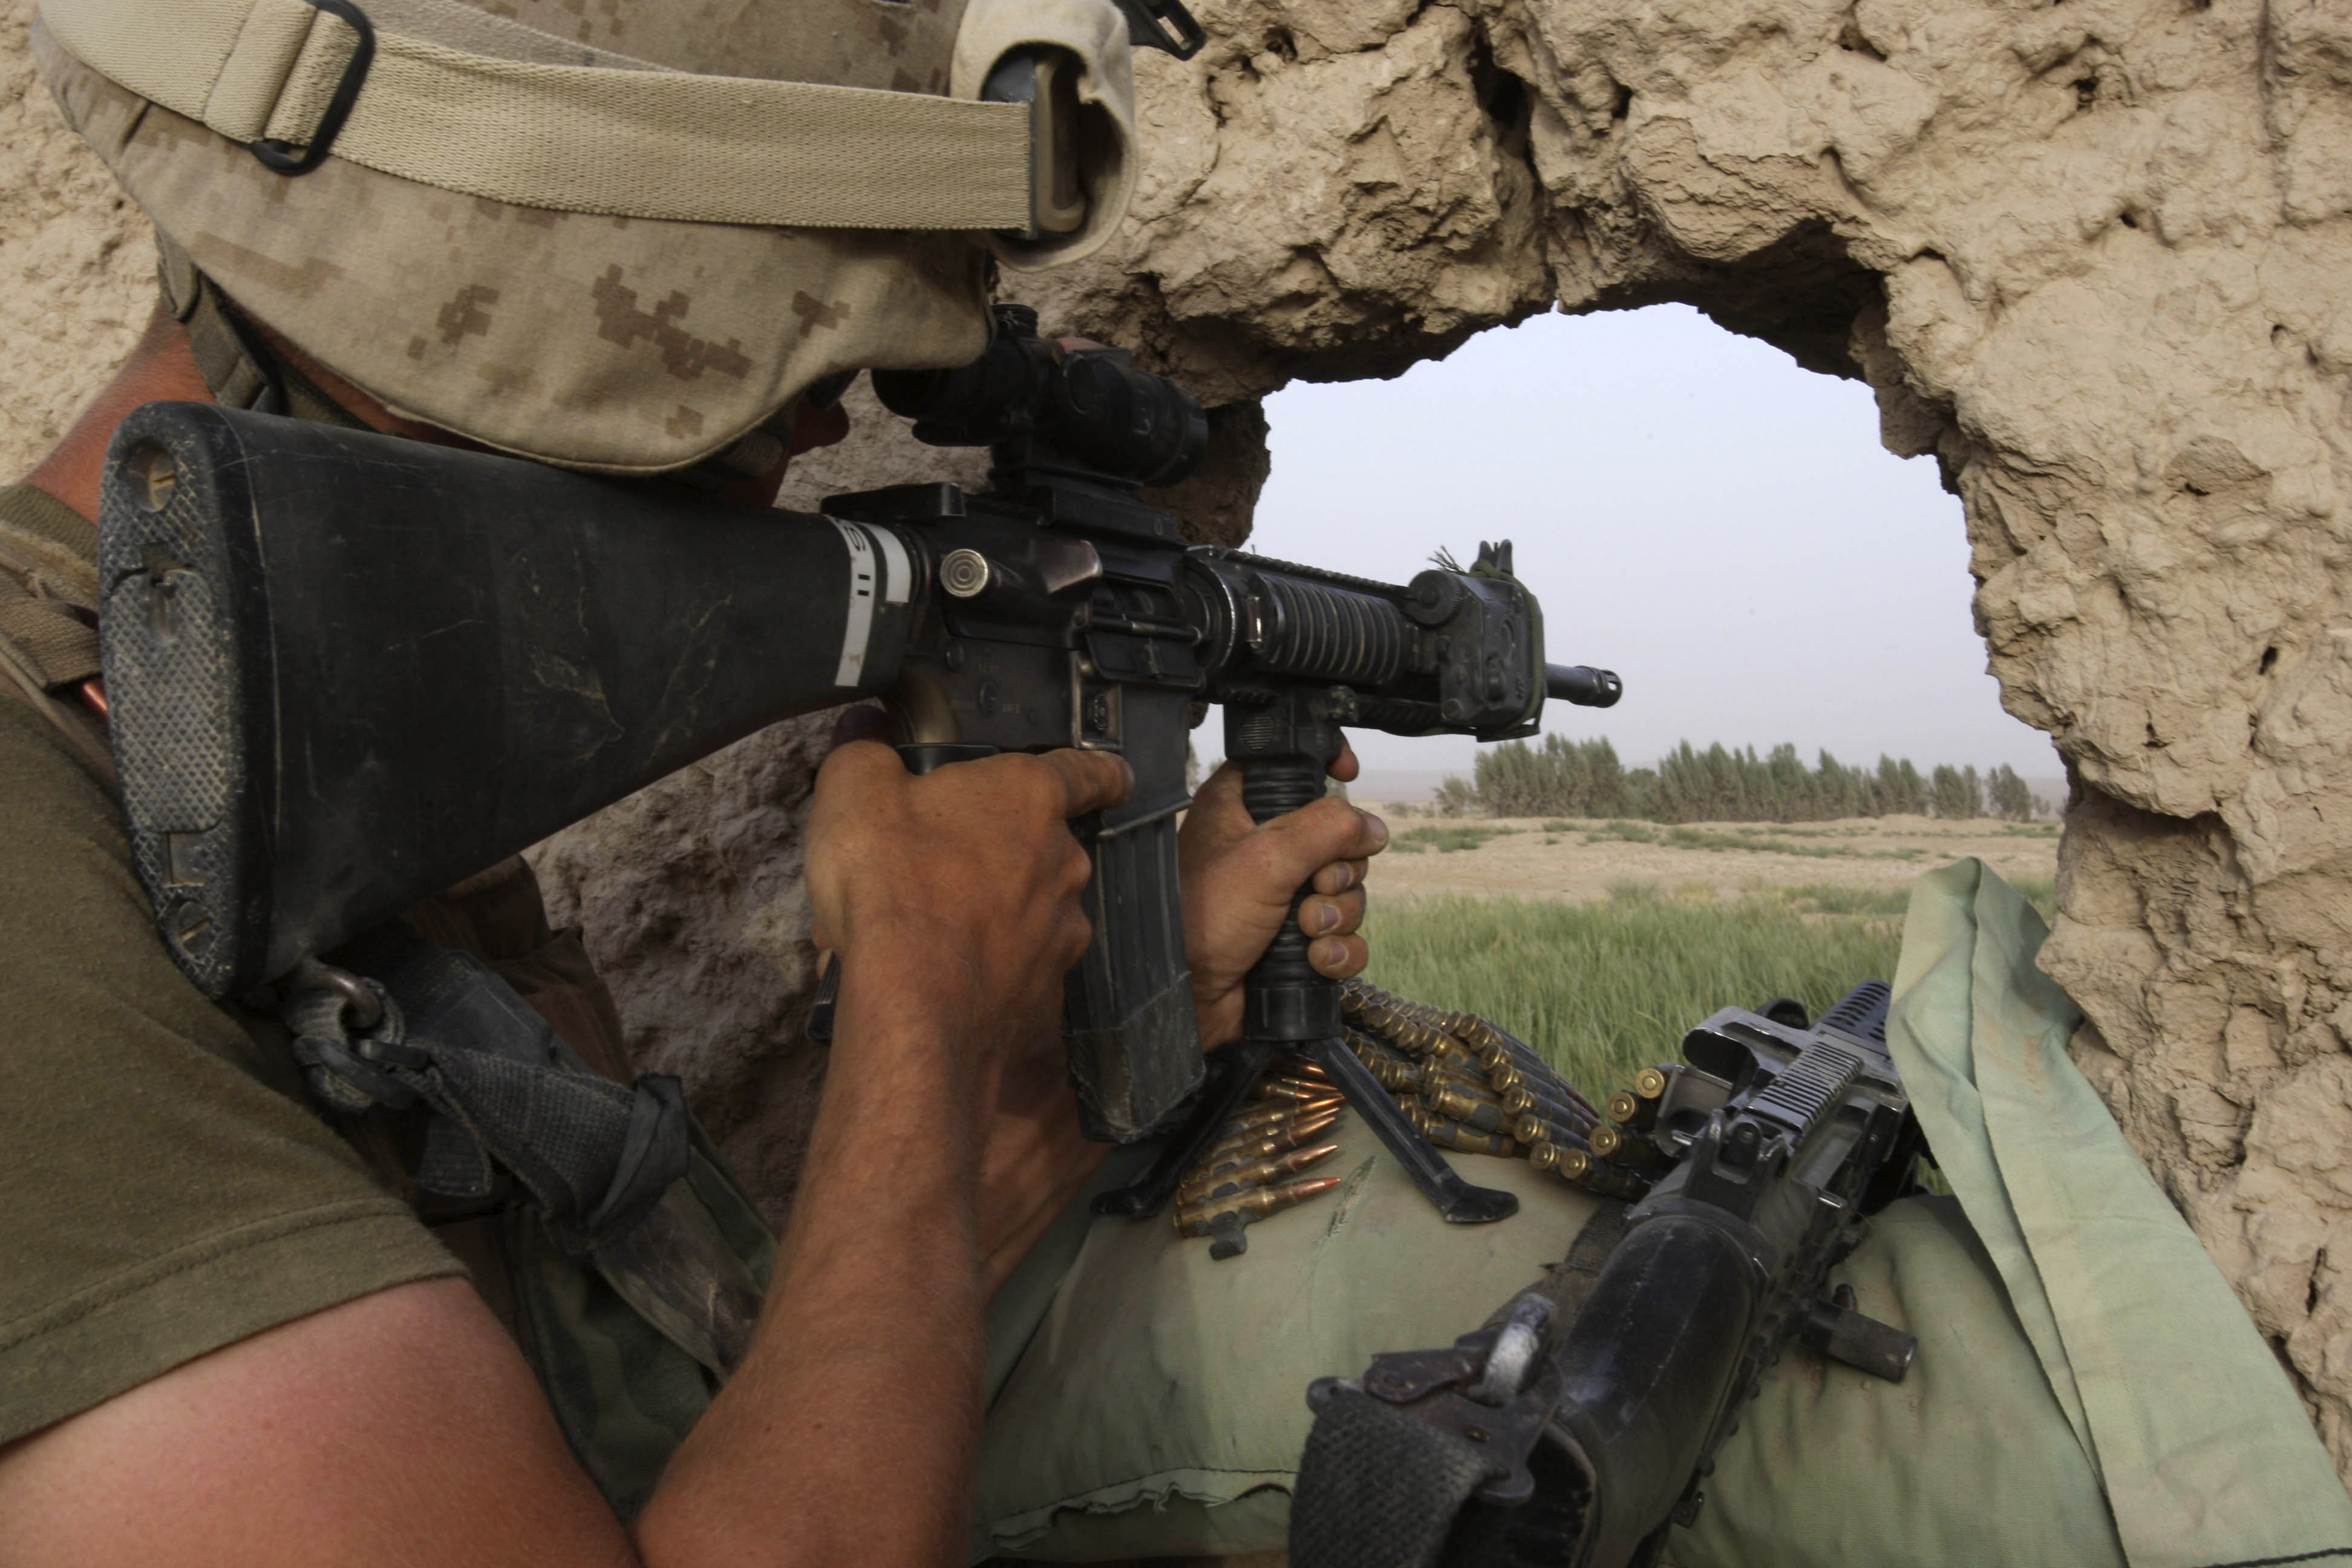 A U.S. Marine from the 24th Marine Expeditionary Unit observes after firing on a Taliban position near the town of Garmser in Helmand Province, Afghanistan, in May 2008.